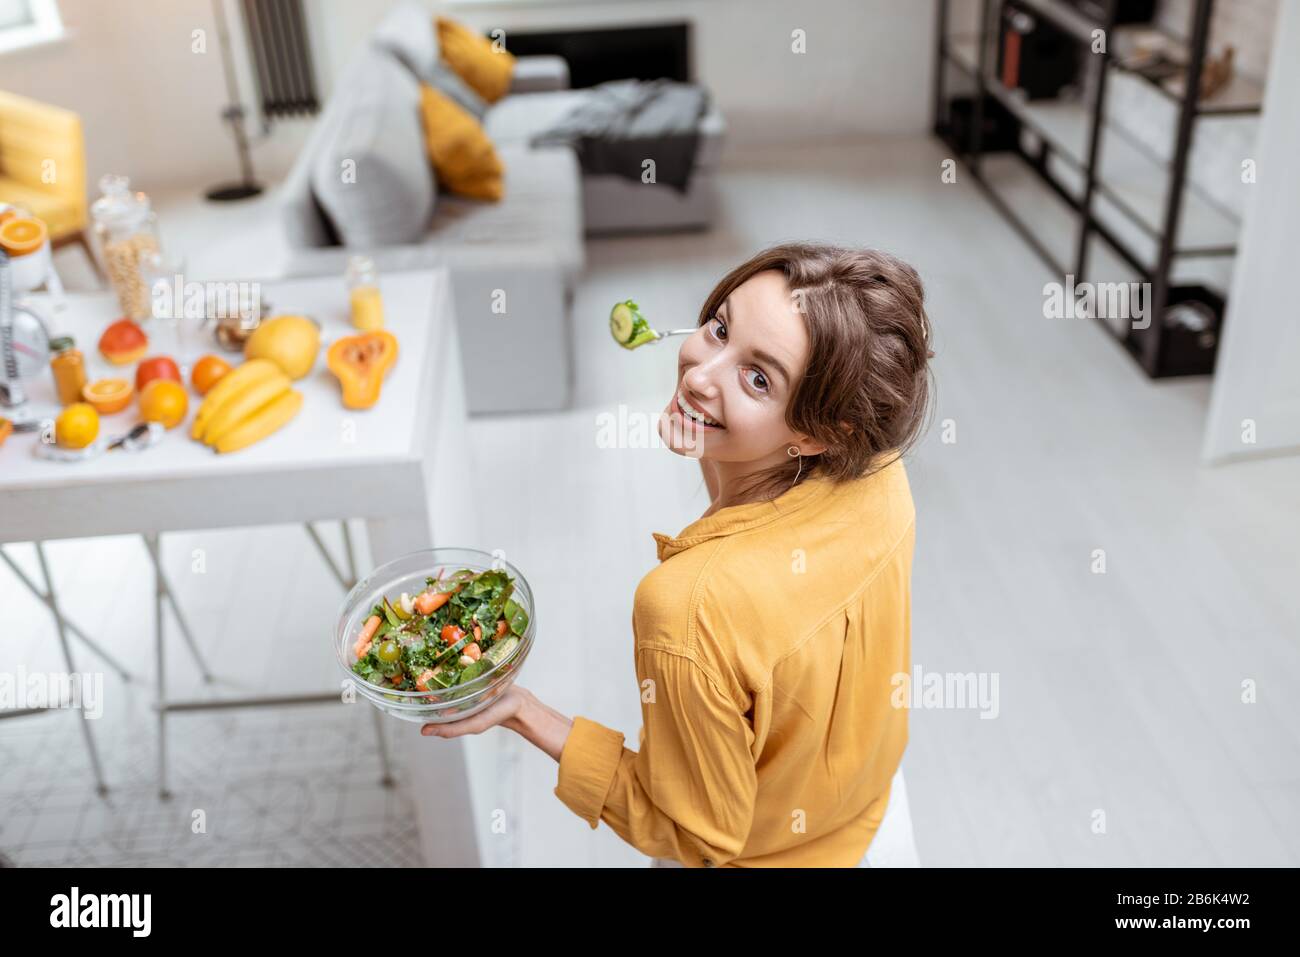 Portrait of a young and cheerful woman dressed in bright shirt eating salad at home. Concept of wellbeing, healthy food and homeliness Stock Photo